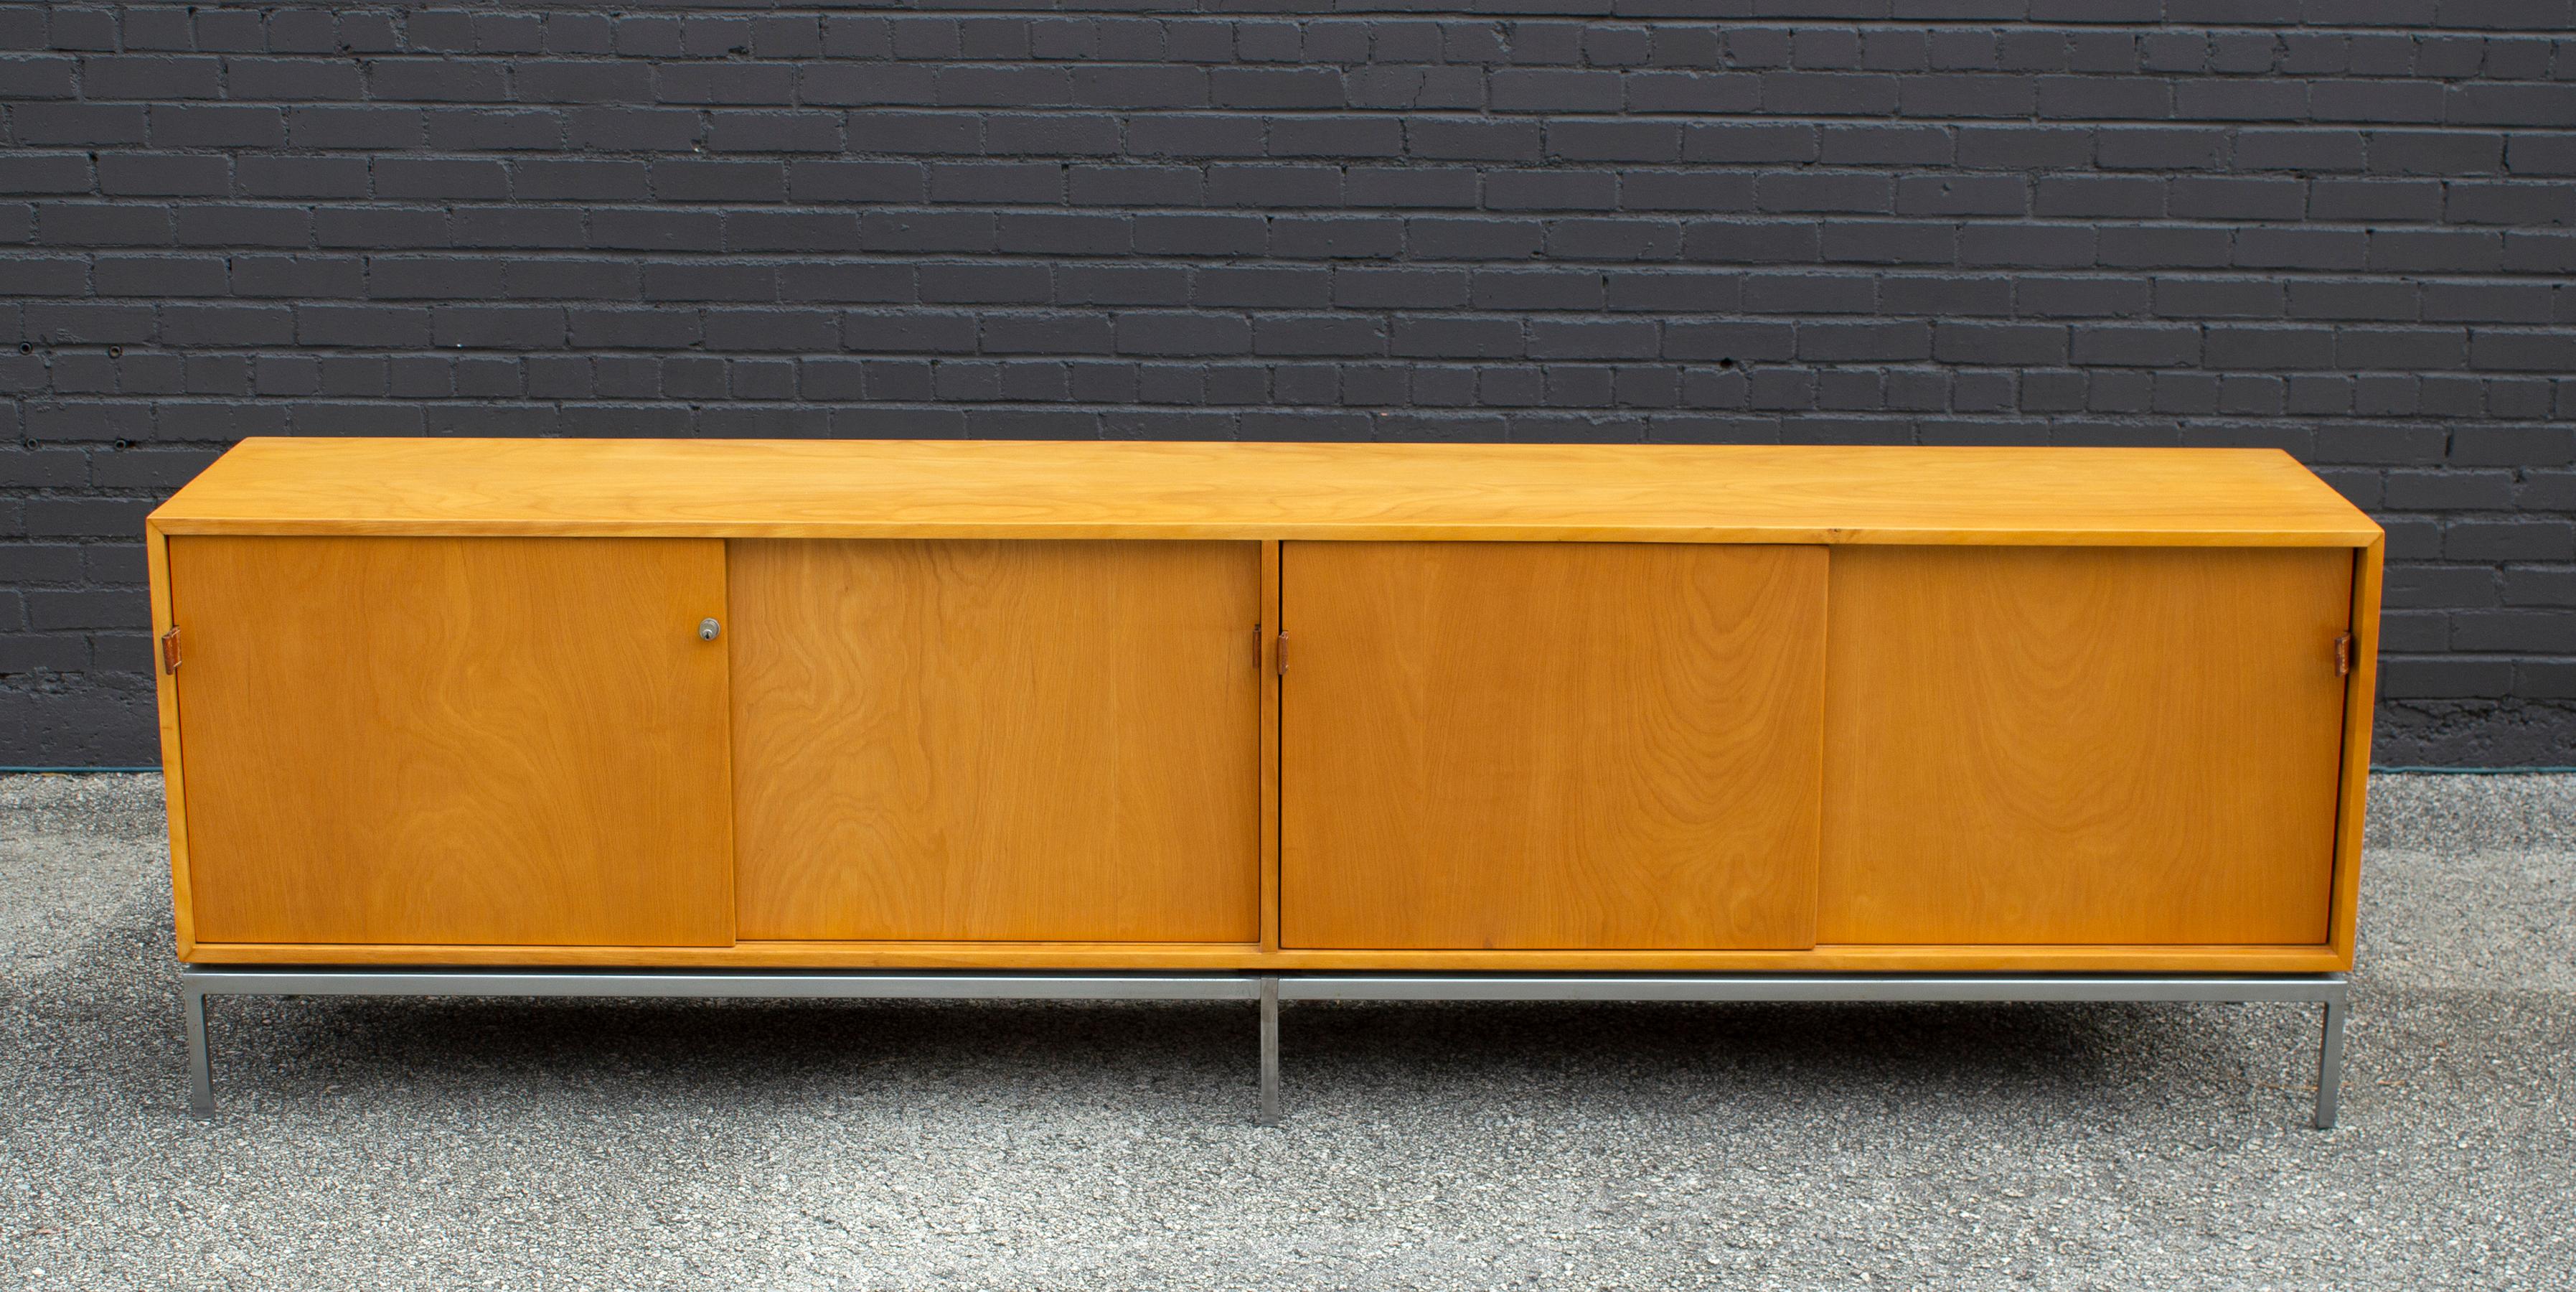 Florence Knoll Maple Credenza with Leather Pulls and Oak Drawers Early 1950s In Good Condition For Sale In Dallas, TX